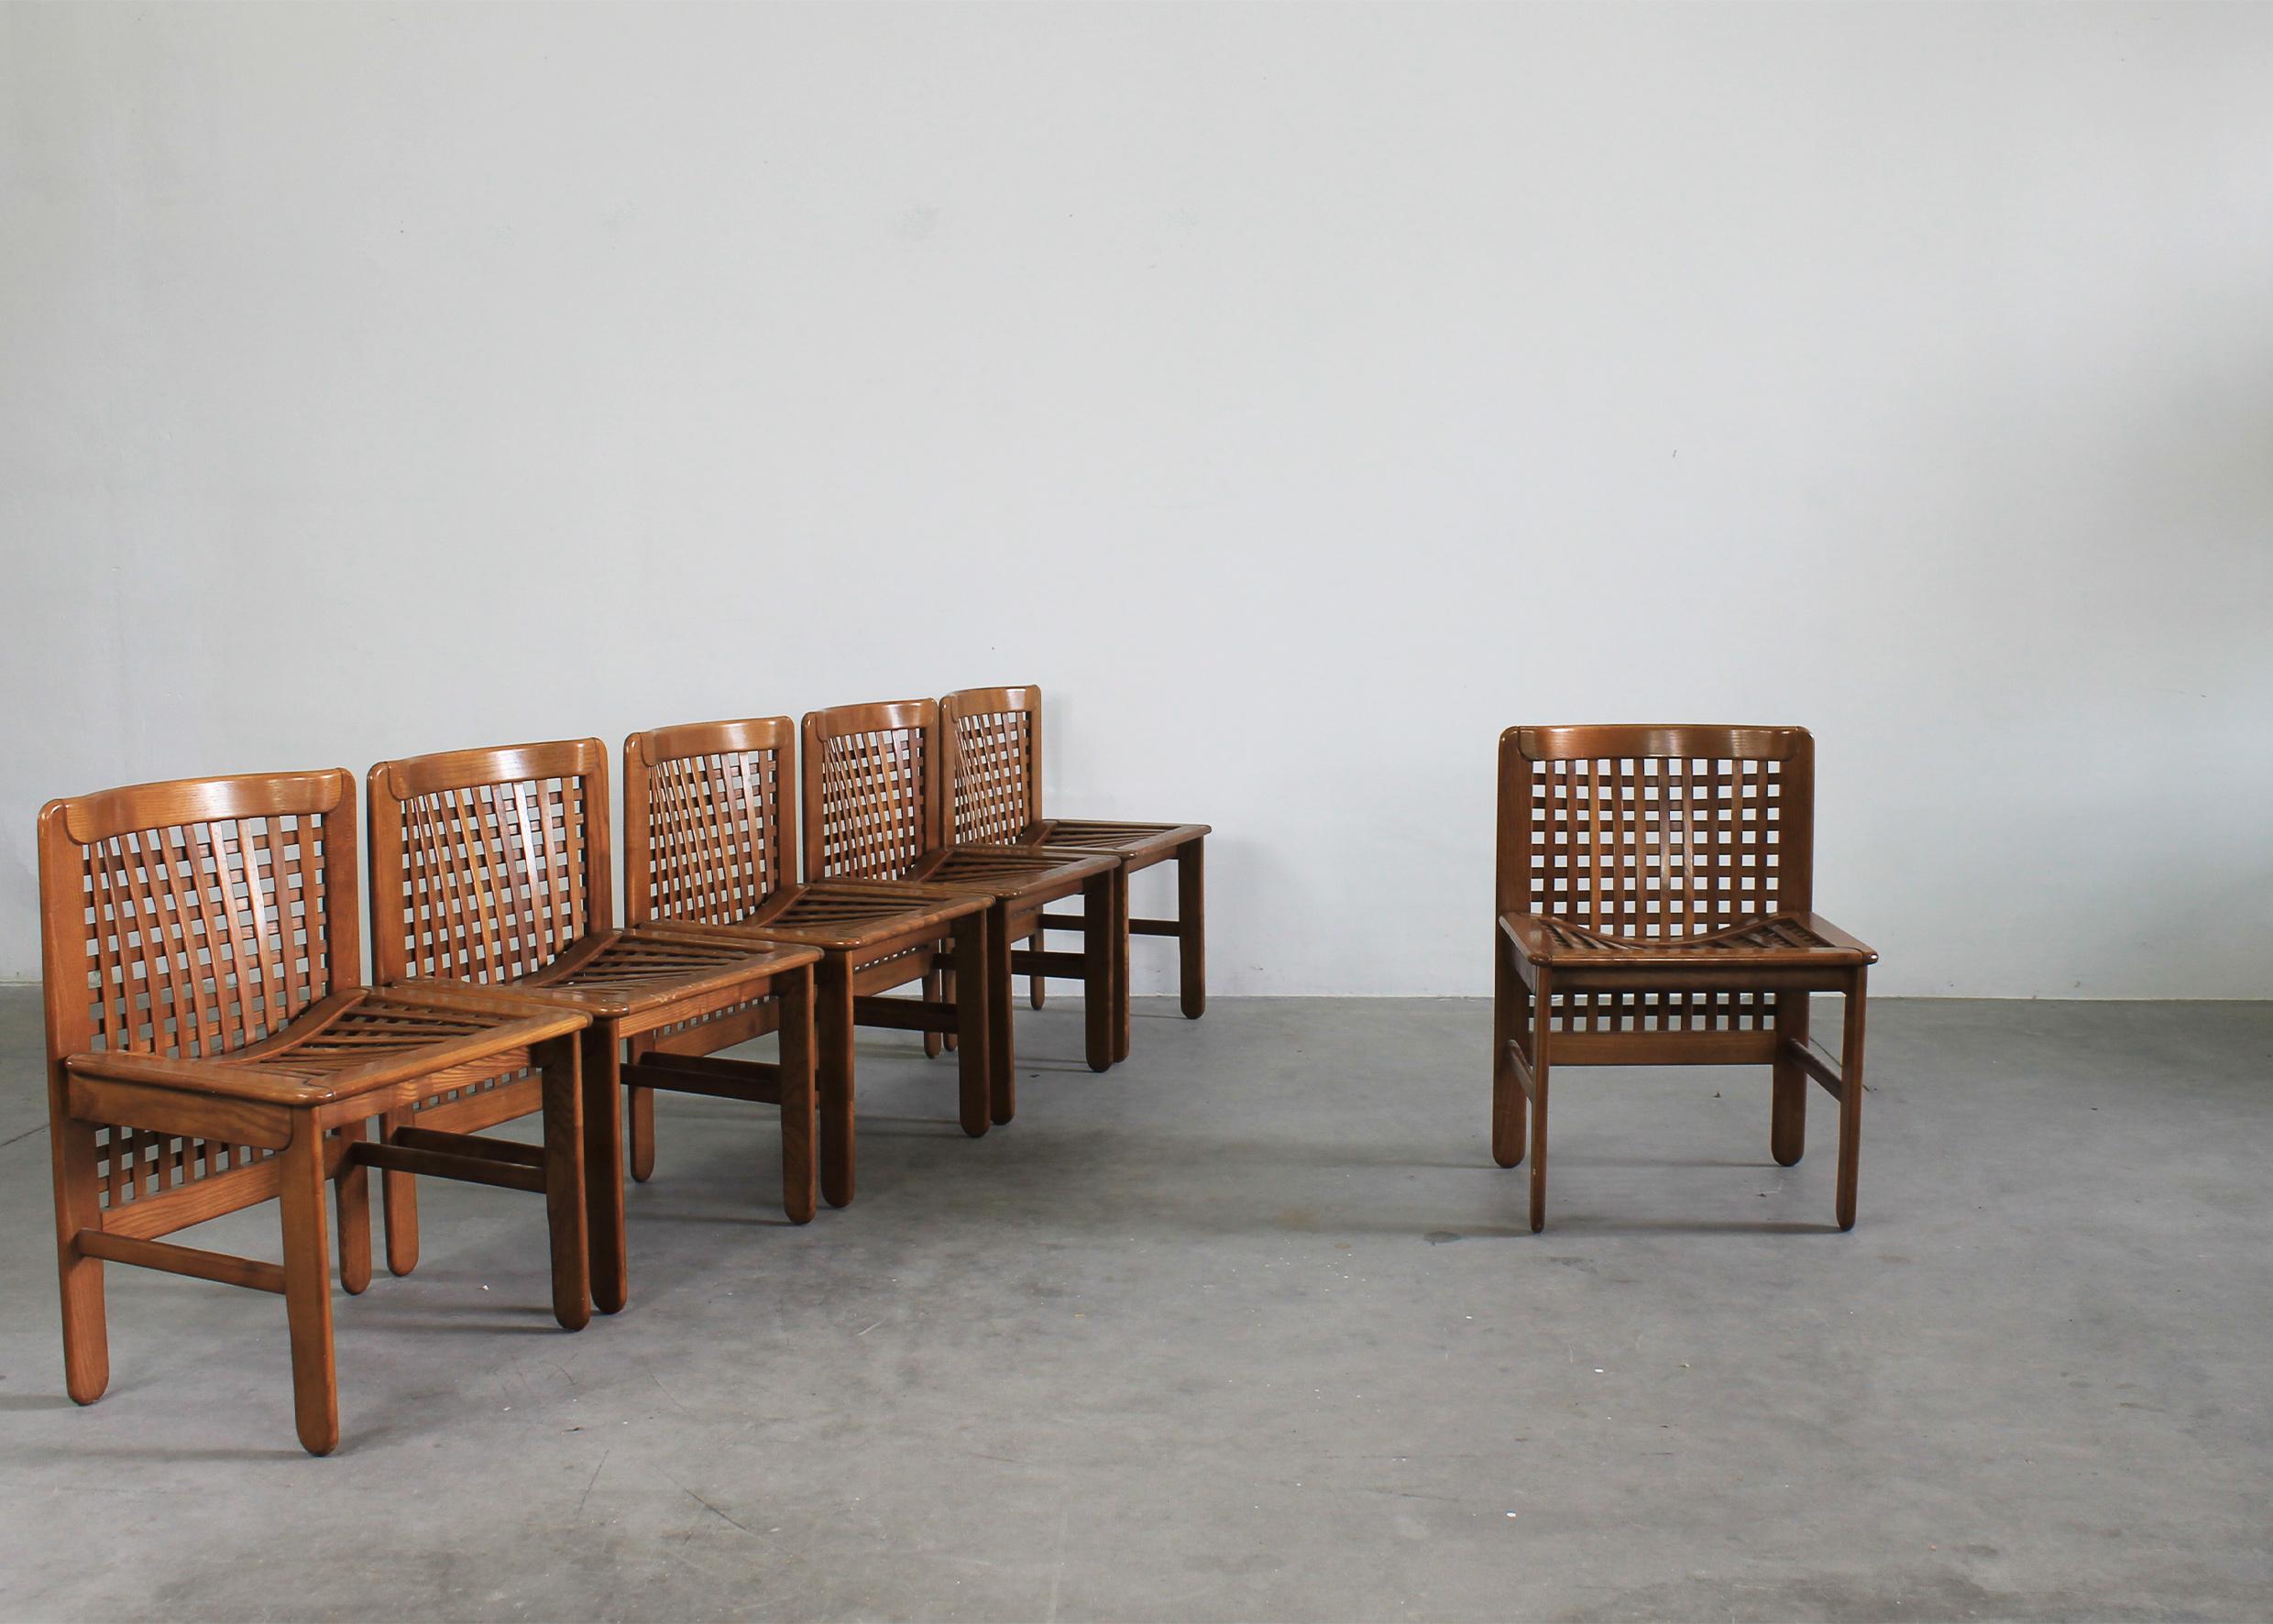 Set of six Transenna chairs in wood, designed by Titina Ammannati and Giampiero Vitelli and produced by Pozzi and Verga in 1970s.
